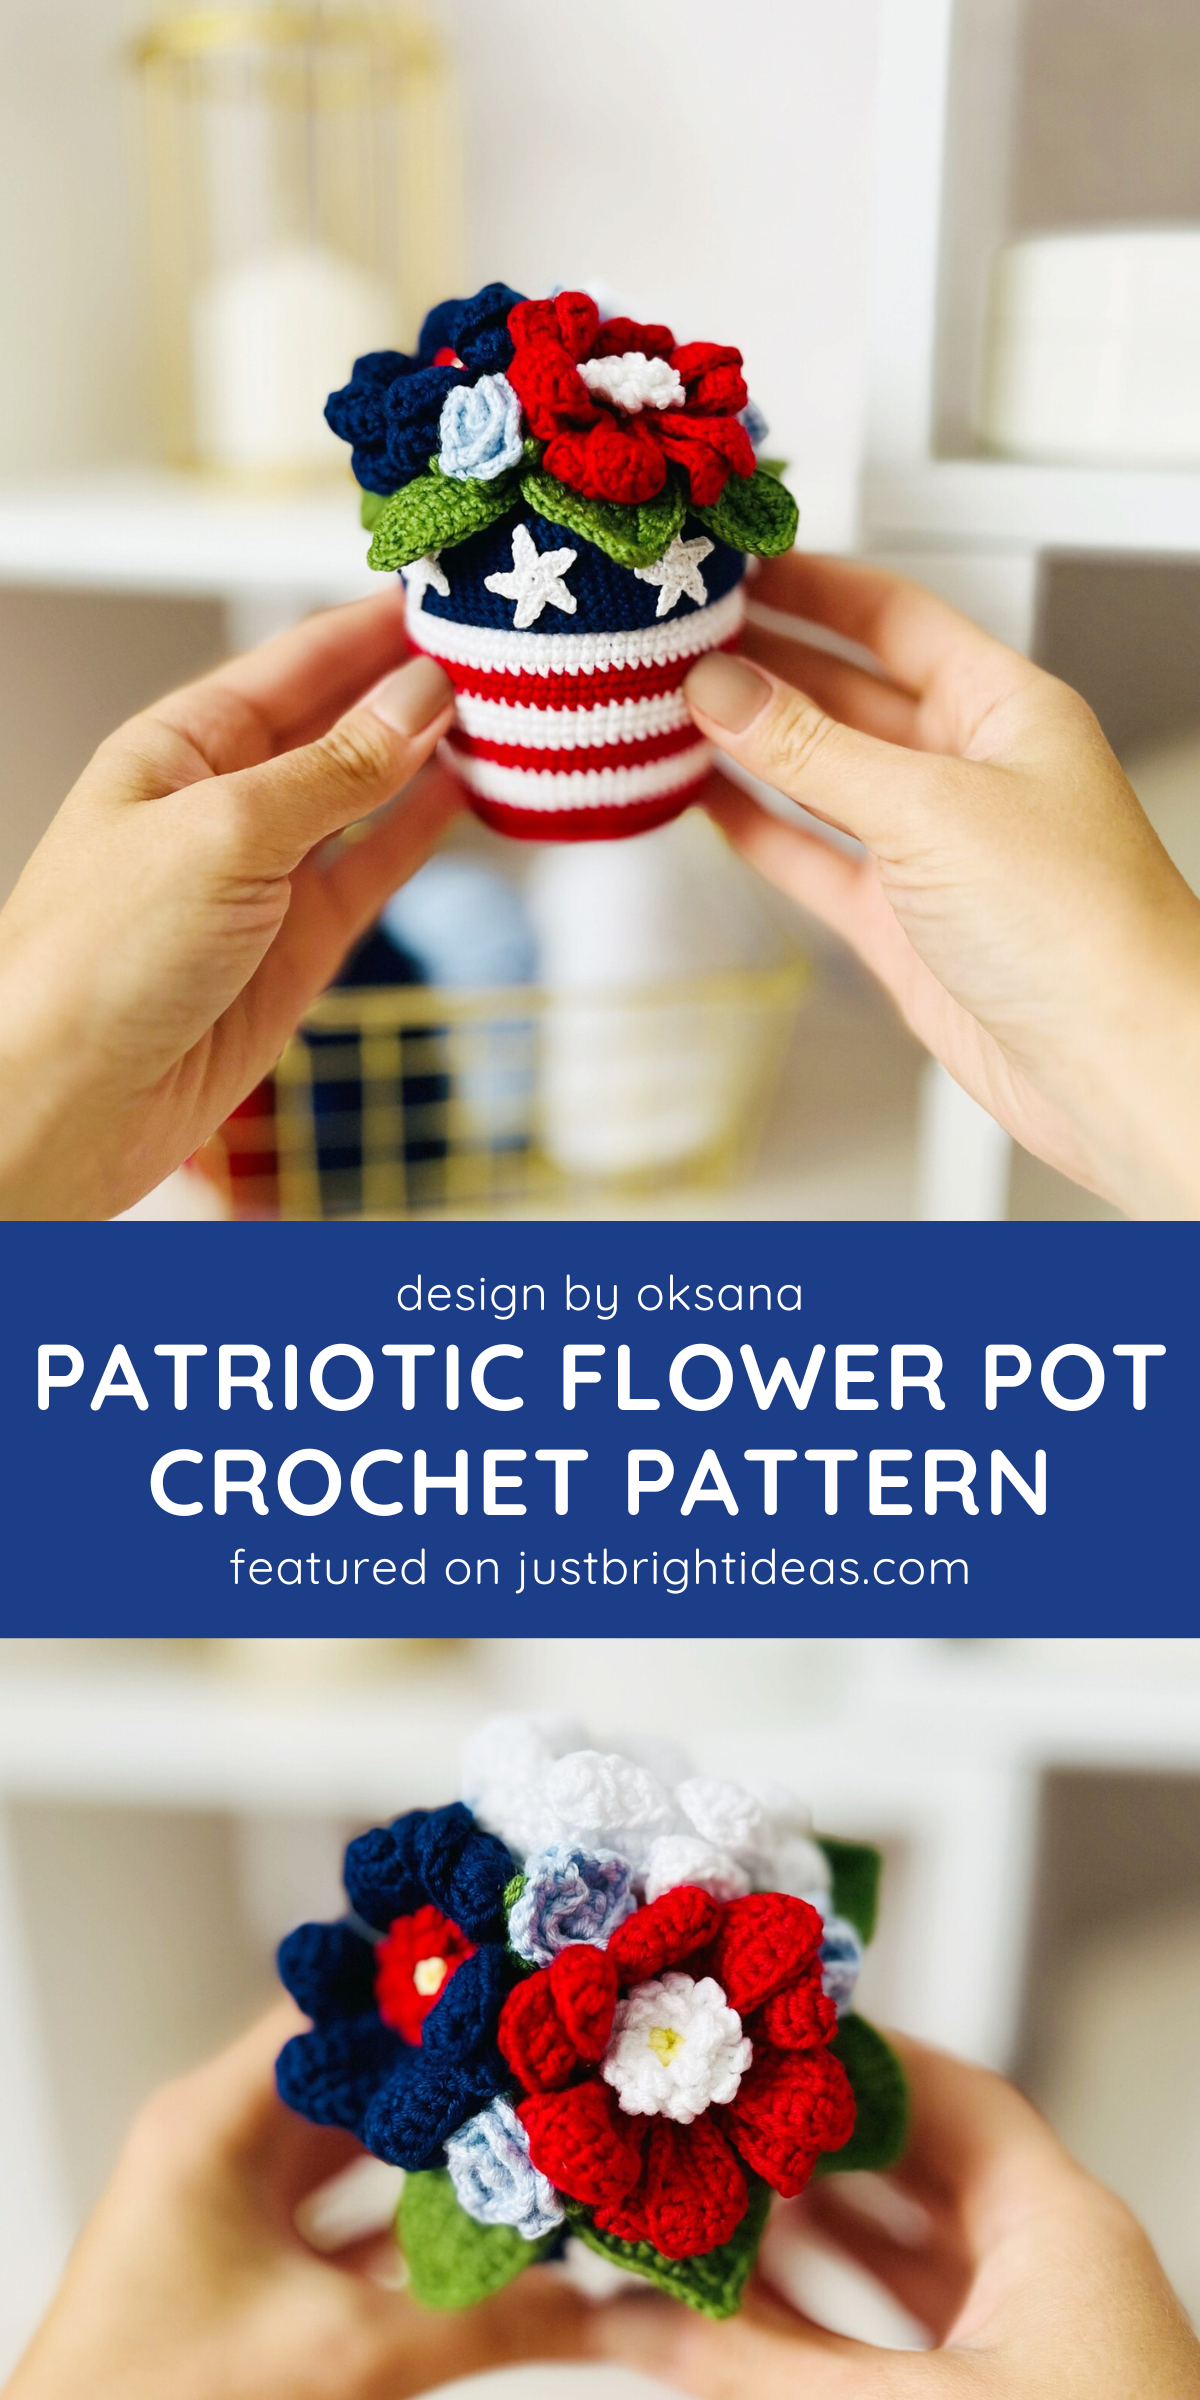 🌺🇺🇸 "Brighten up your Independence Day with a beautiful red, white, and blue flower pot filled with crochet flowers! Perfect for a festive centerpiece." 🌼🧶
👉 Head to our post to see the pattern! 🔗